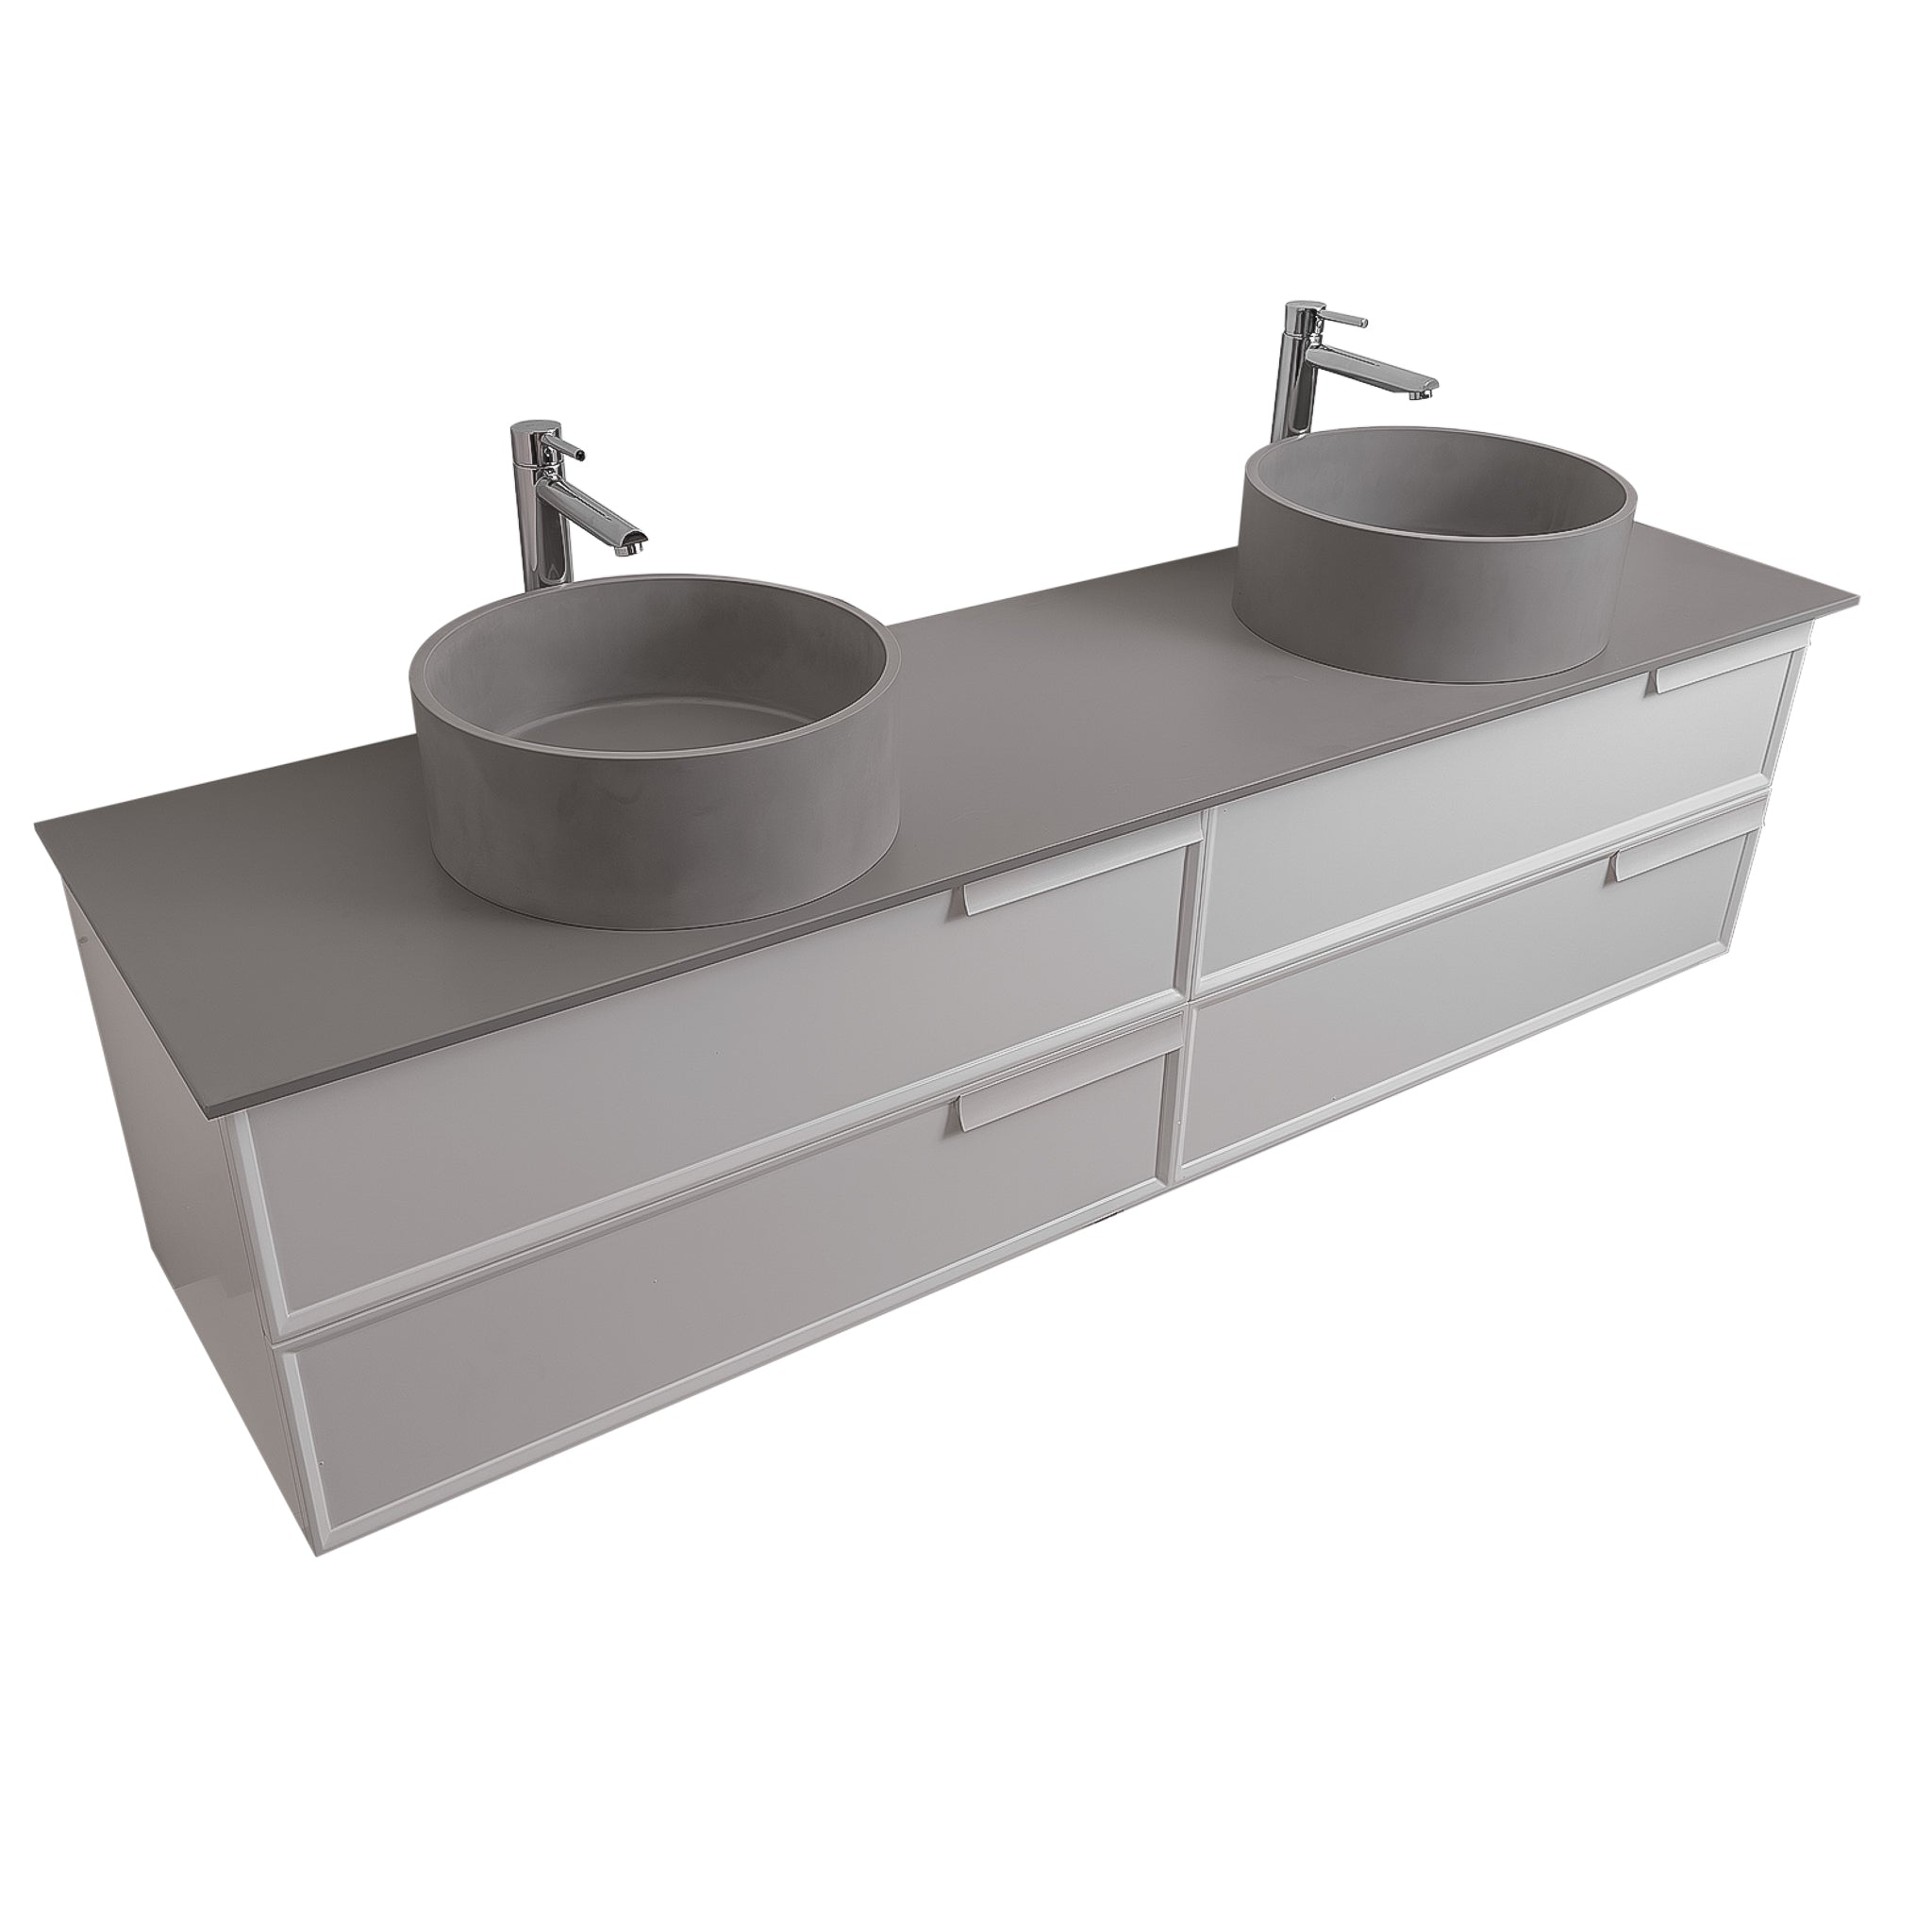 Garda 63 Matte White Cabinet, Solid Surface Flat Grey Counter and Two Round Solid Surface Grey Basin 1386, Wall Mounted Modern Vanity Set